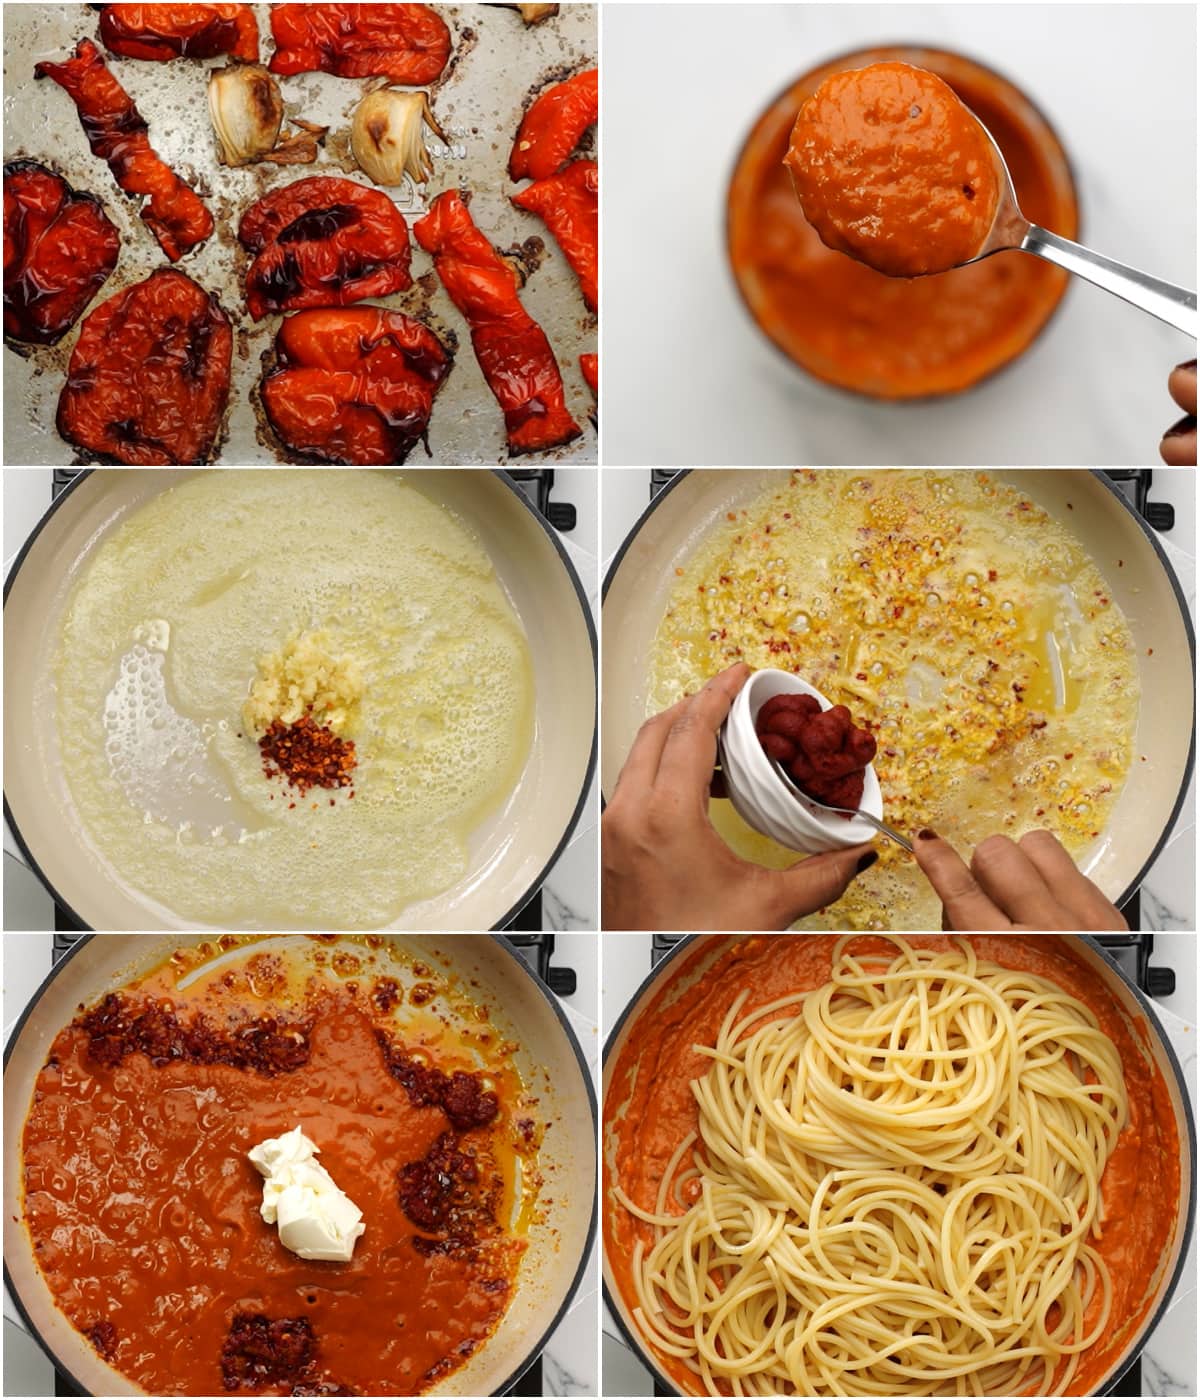 Collage shows steps to make red pepper pasta - roast red pepper, blend to a sauce, saute aromatics, add tomato paste, add cream cheese, add pasta and stir.